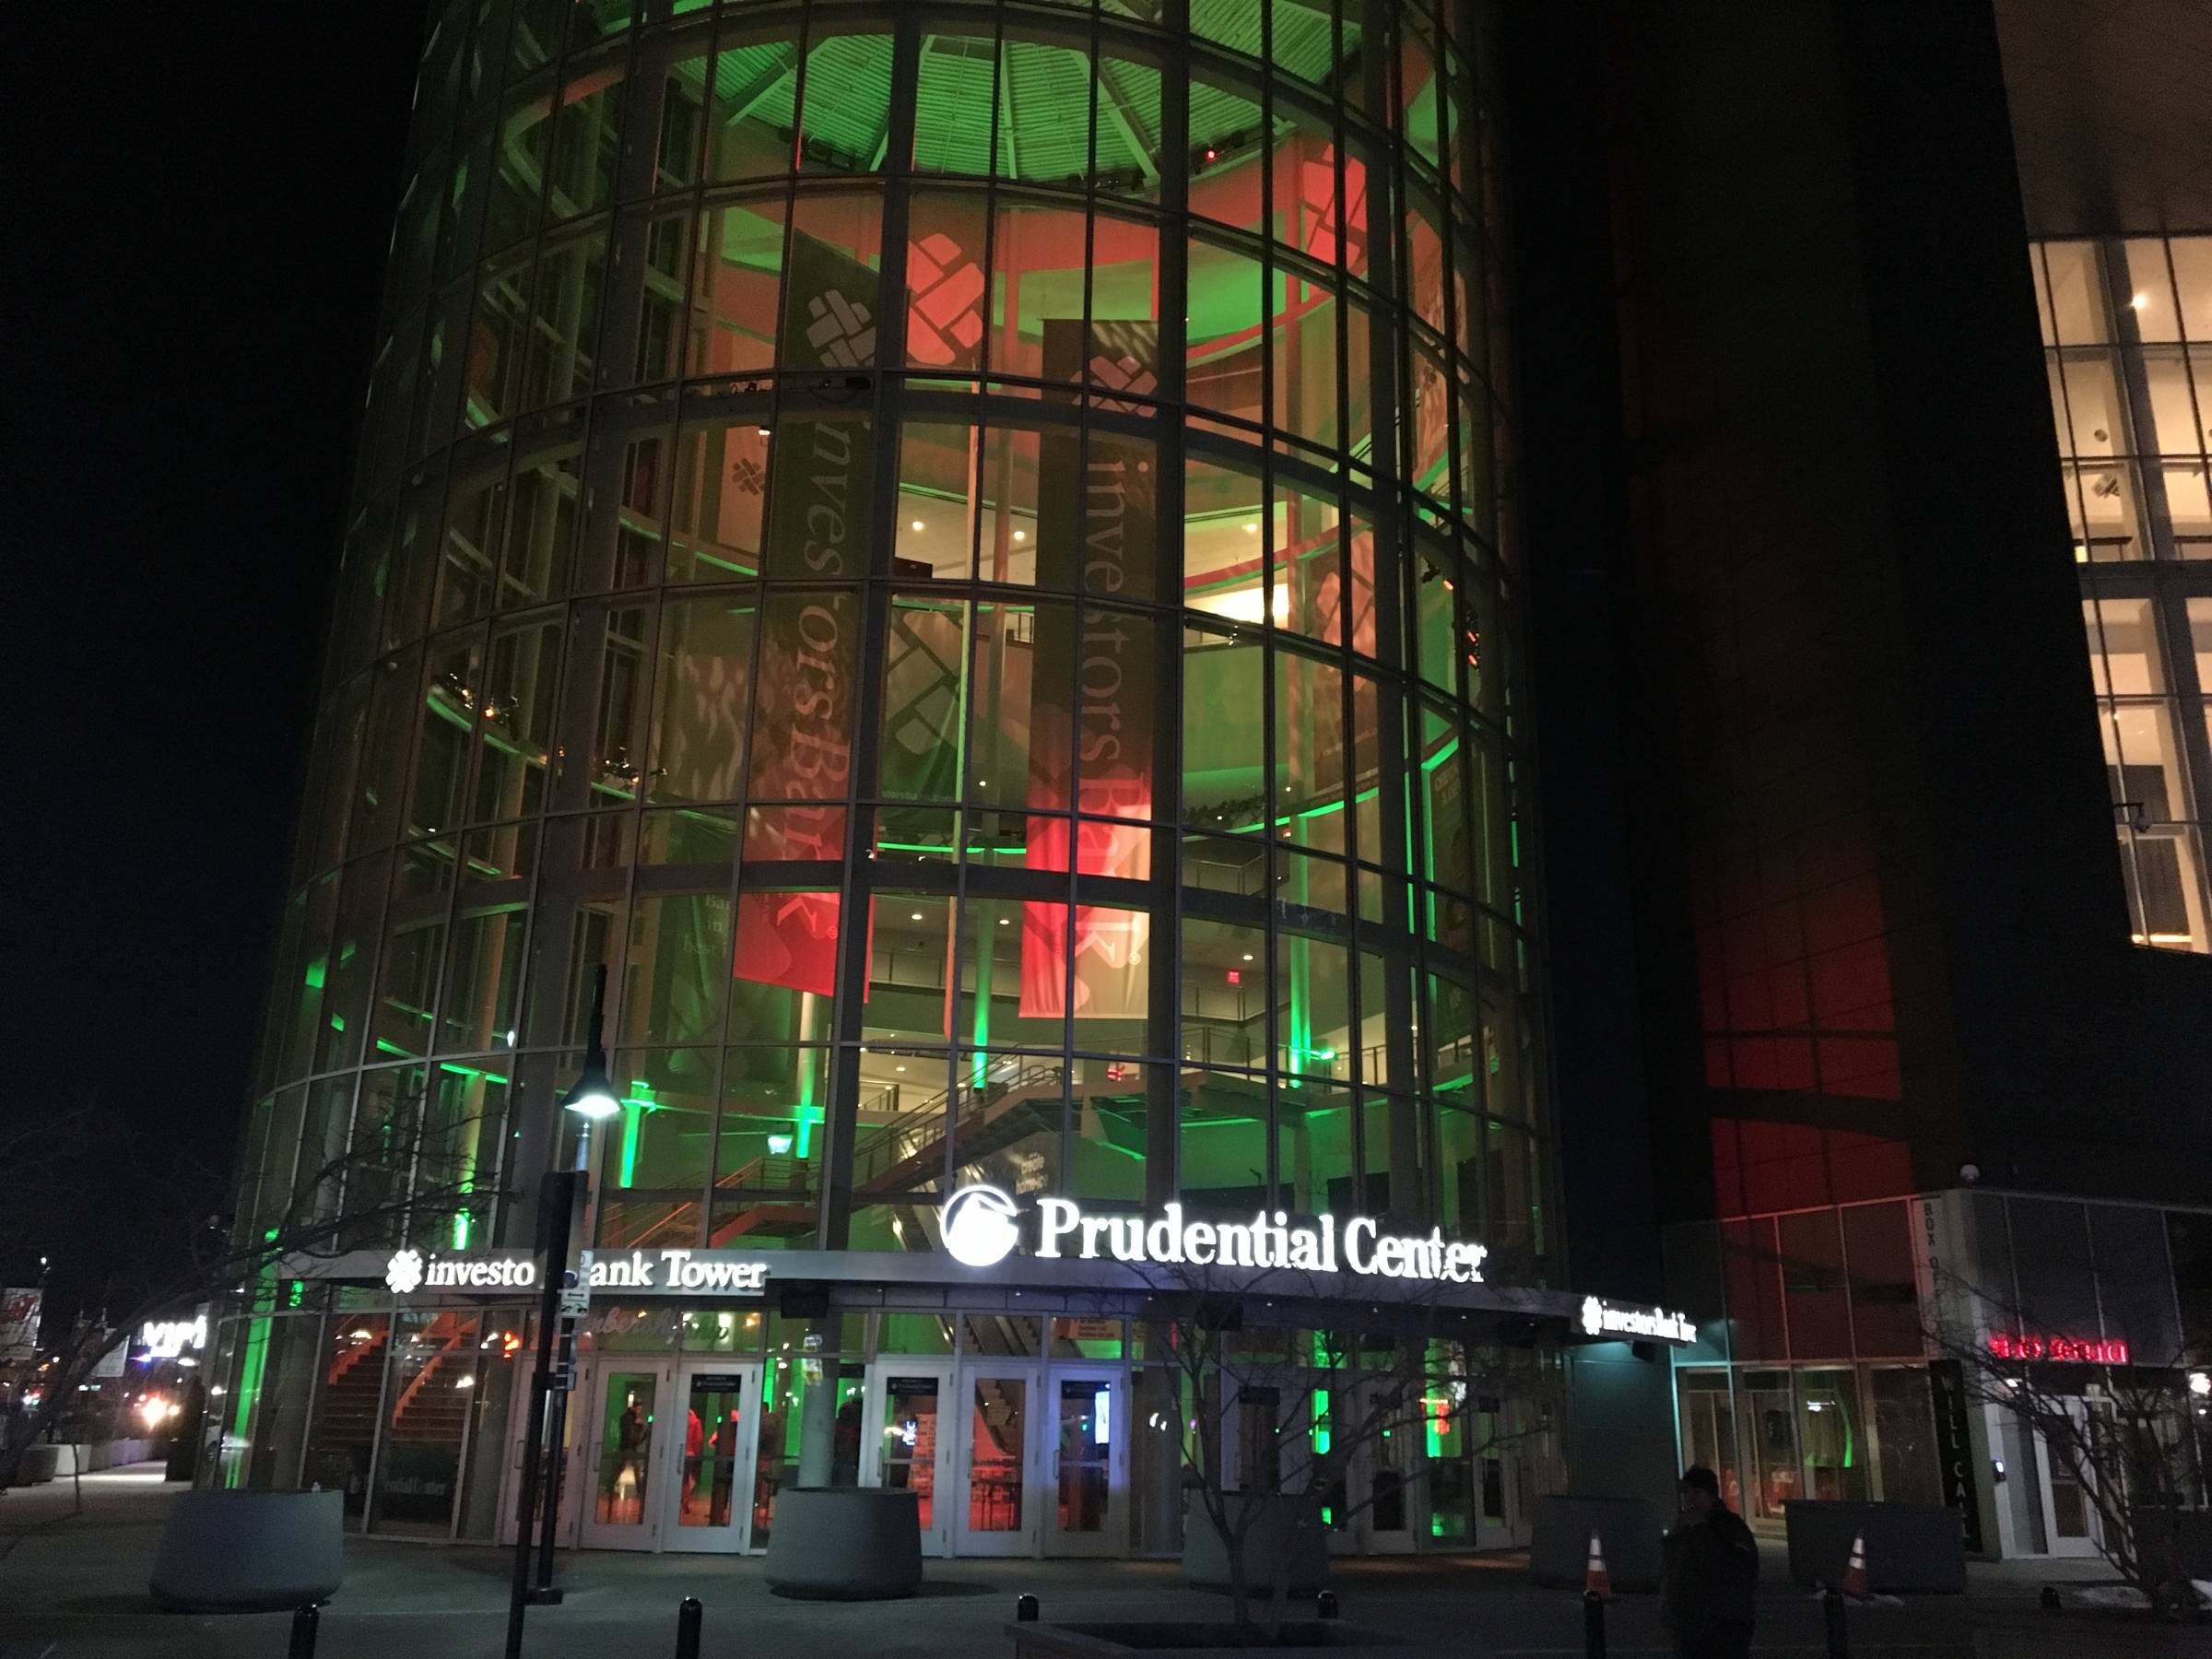 Main Entrance at Prudential Center